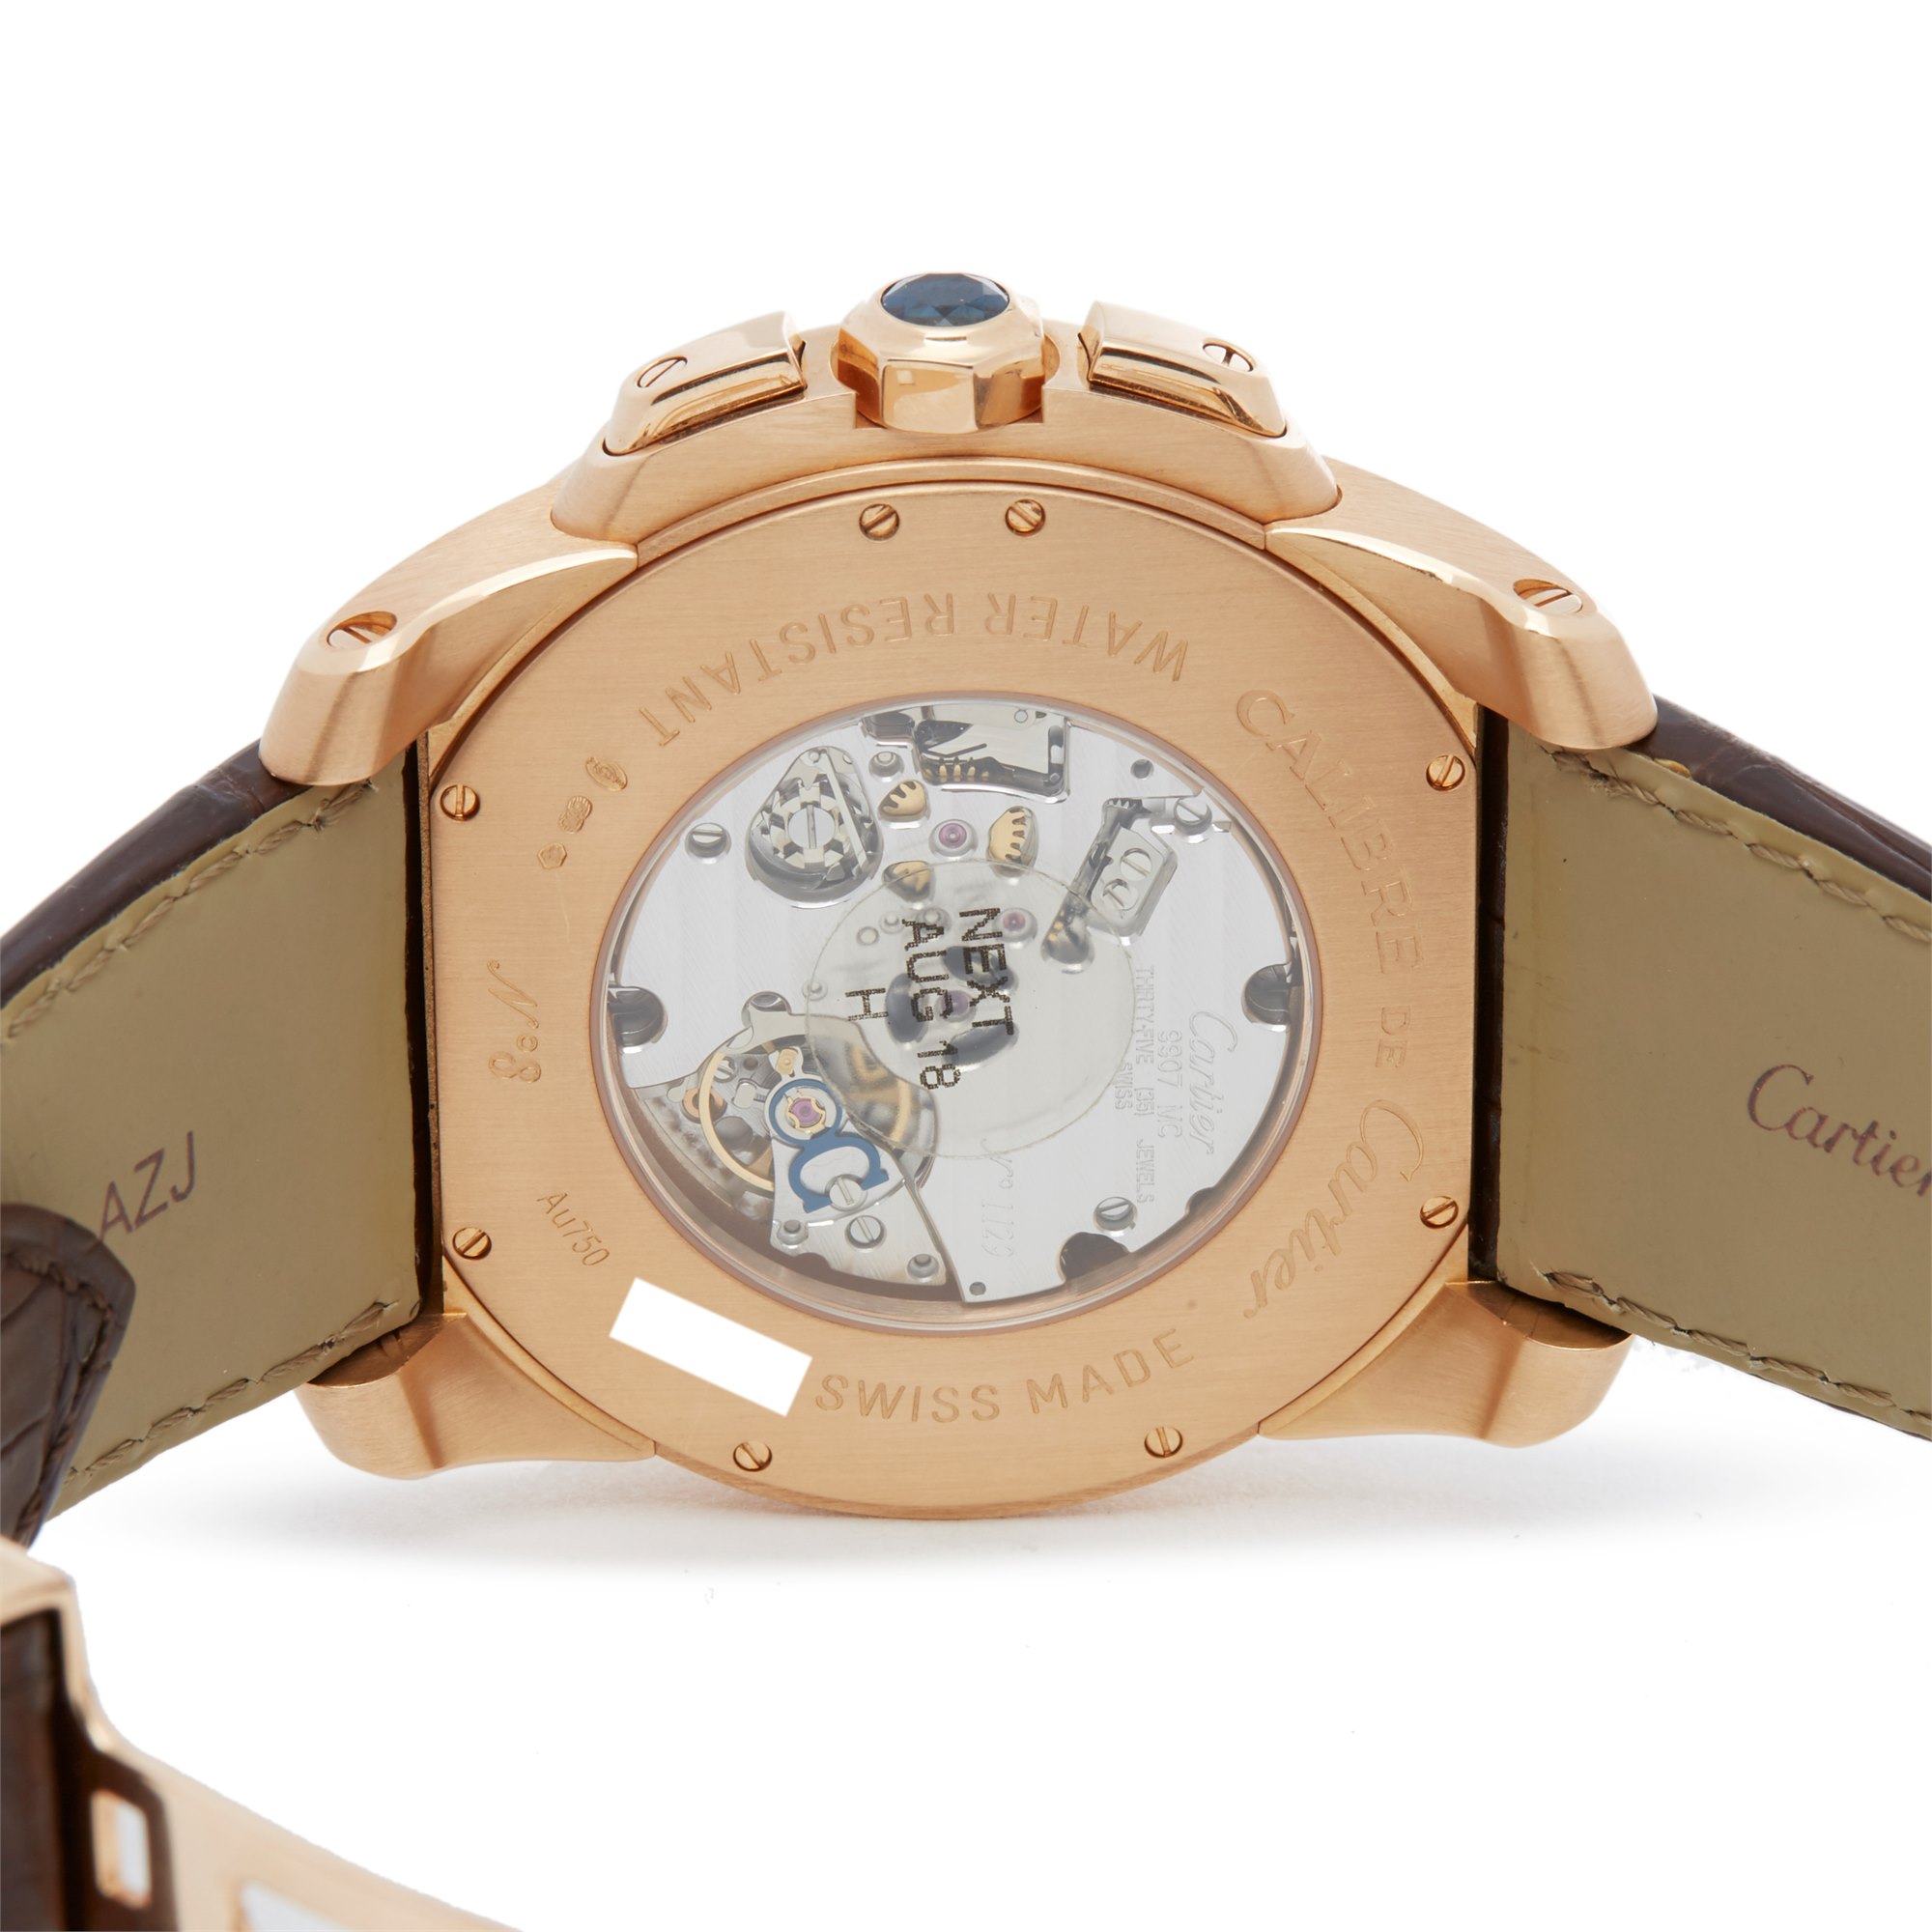 Cartier Calibre W7100004 or 3242 Men Rose Gold Central Chronograph Watch - Image 6 of 6